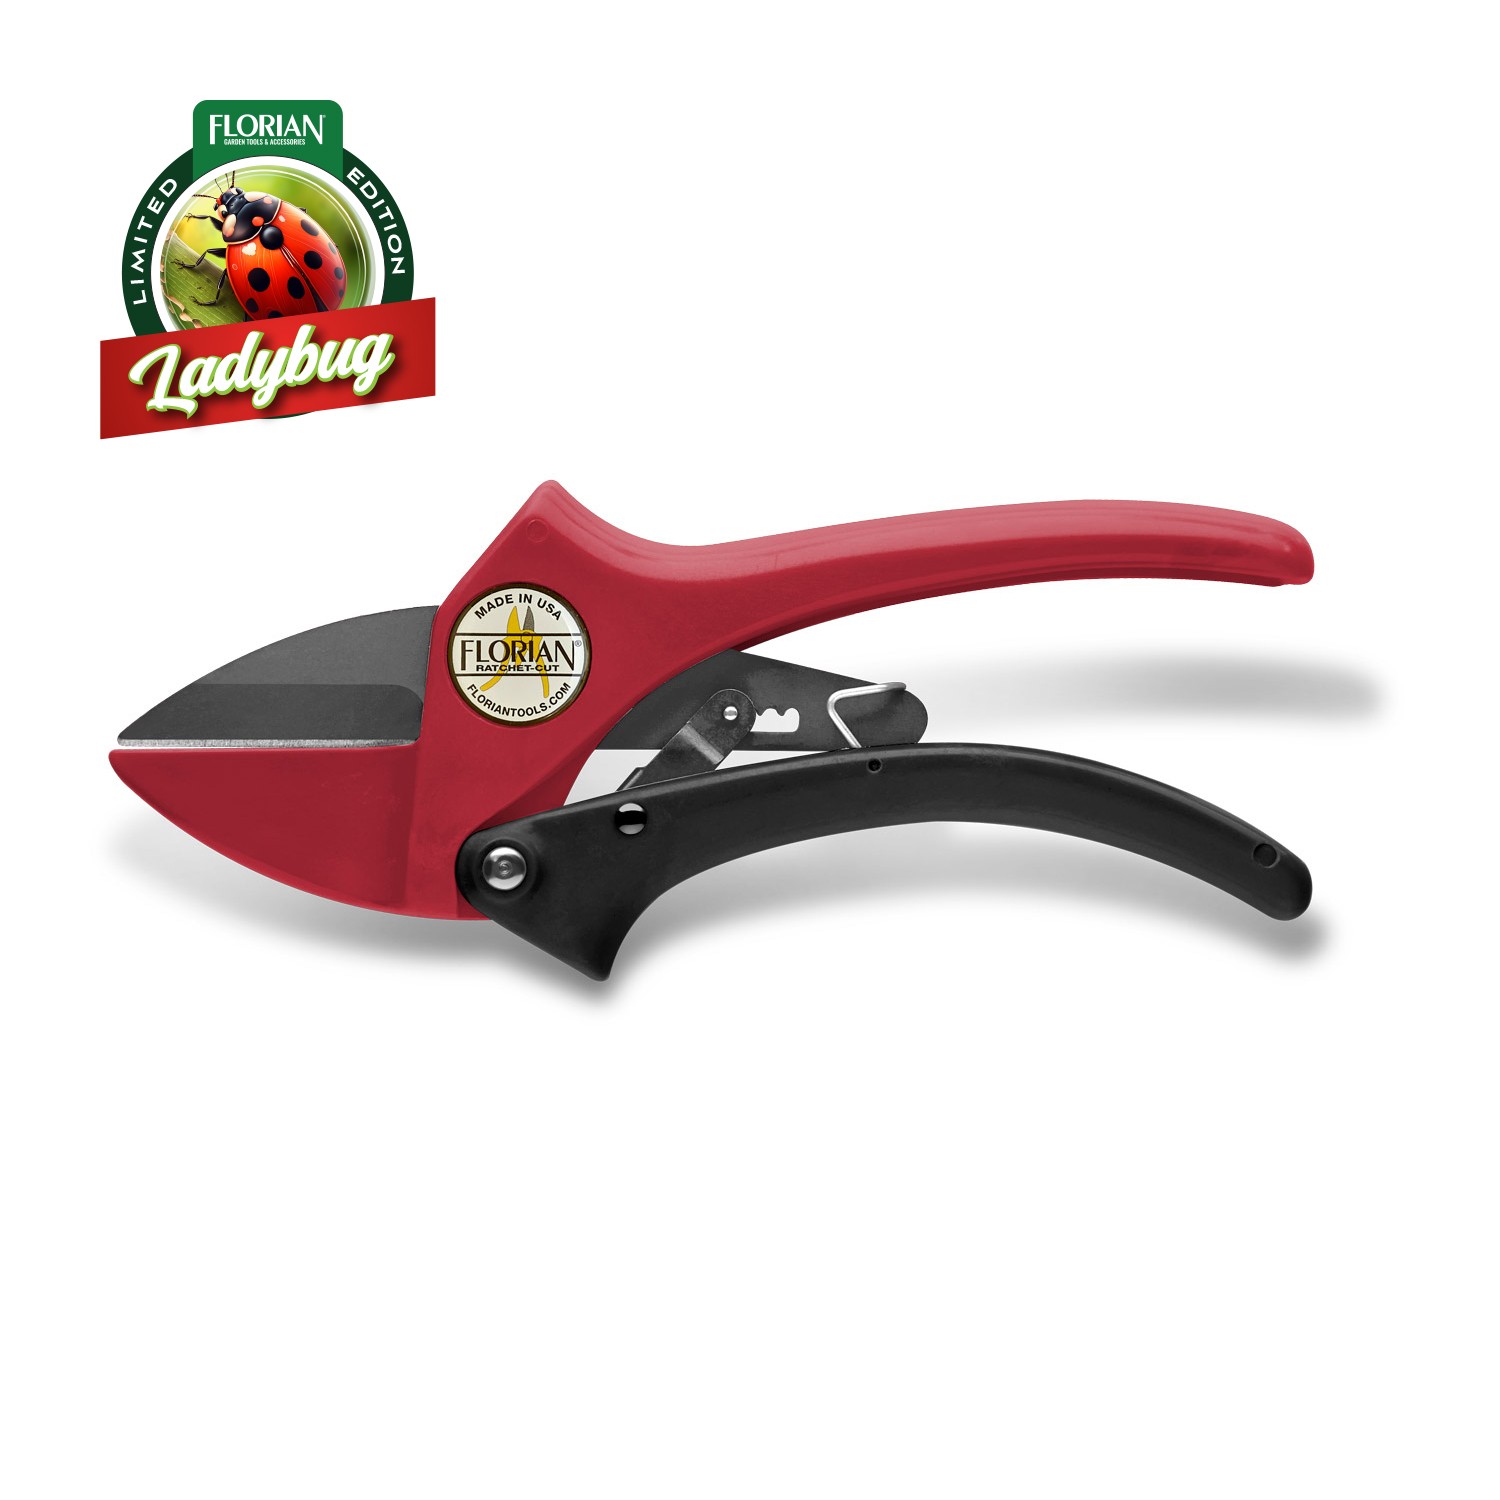 Special Edition - The Lady Bug 701 Ratcheting Pruner